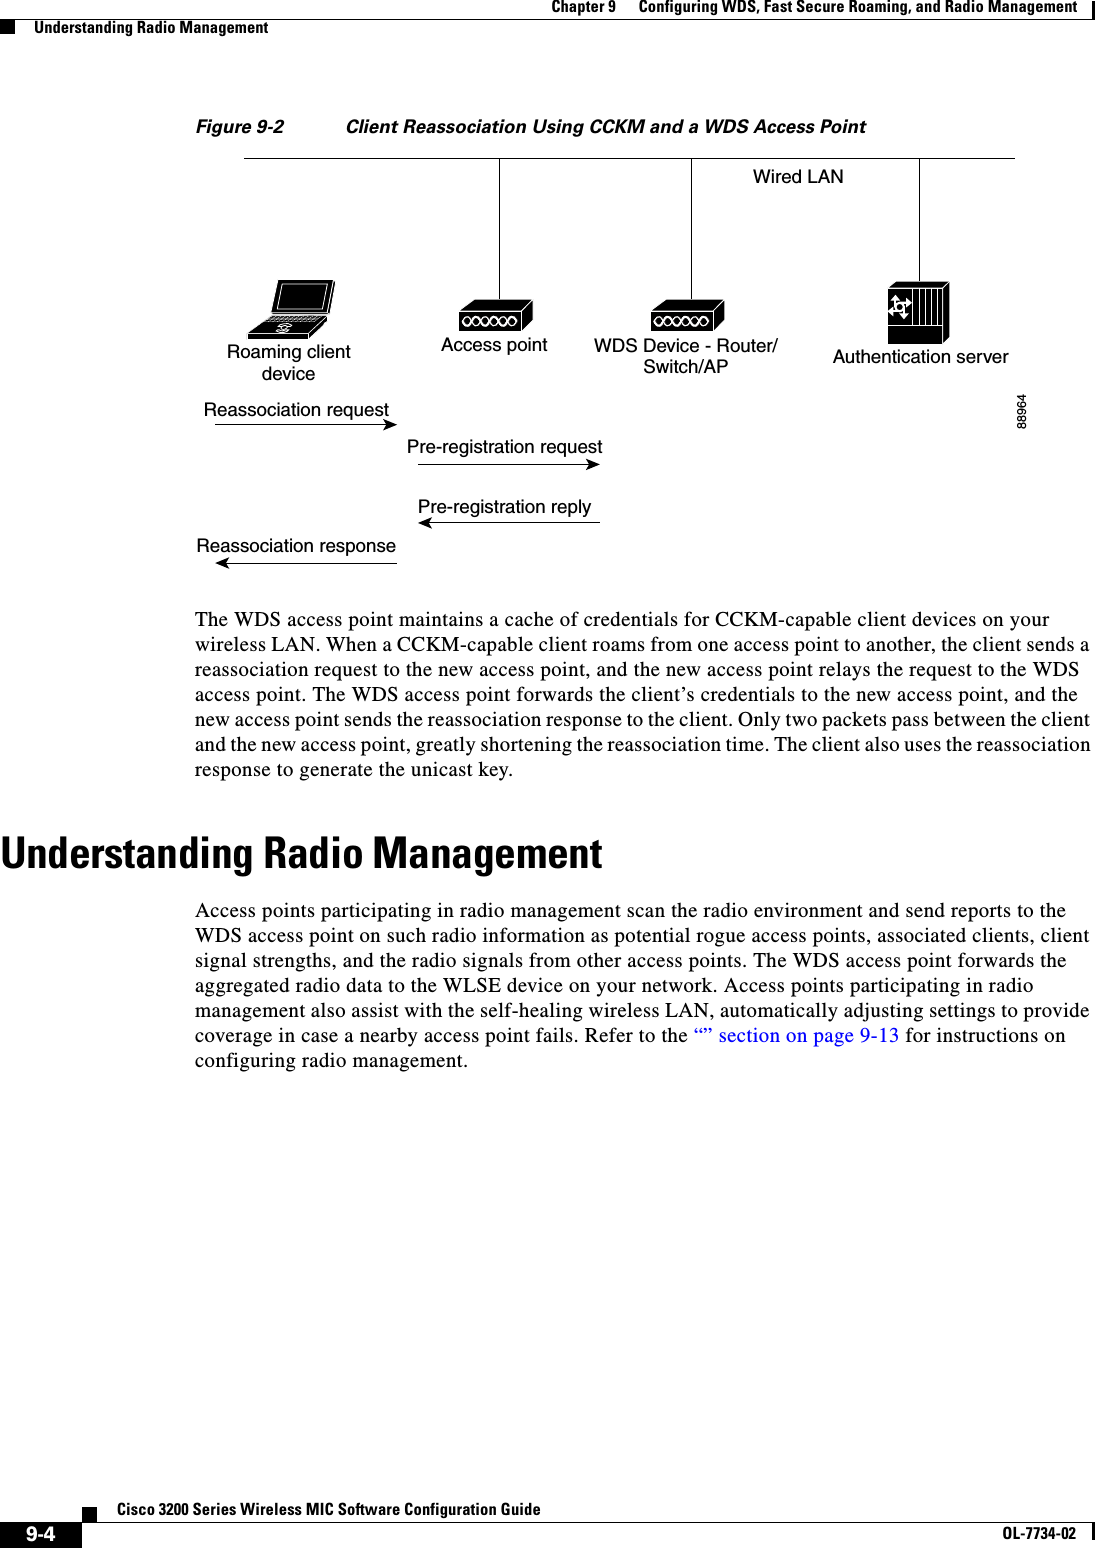 9-4Cisco 3200 Series Wireless MIC Software Configuration GuideOL-7734-02Chapter 9      Configuring WDS, Fast Secure Roaming, and Radio ManagementUnderstanding Radio ManagementFigure 9-2 Client Reassociation Using CCKM and a WDS Access PointThe WDS access point maintains a cache of credentials for CCKM-capable client devices on your wireless LAN. When a CCKM-capable client roams from one access point to another, the client sends a reassociation request to the new access point, and the new access point relays the request to the WDS access point. The WDS access point forwards the client’s credentials to the new access point, and the new access point sends the reassociation response to the client. Only two packets pass between the client and the new access point, greatly shortening the reassociation time. The client also uses the reassociation response to generate the unicast key. Understanding Radio ManagementAccess points participating in radio management scan the radio environment and send reports to the WDS access point on such radio information as potential rogue access points, associated clients, client signal strengths, and the radio signals from other access points. The WDS access point forwards the aggregated radio data to the WLSE device on your network. Access points participating in radio management also assist with the self-healing wireless LAN, automatically adjusting settings to provide coverage in case a nearby access point fails. Refer to the “” section on page 9-13 for instructions on configuring radio management.88964Reassociation requestReassociation responsePre-registration requestPre-registration replyRoaming clientdeviceAccess point WDS Device - Router/Switch/AP Authentication serverWired LAN